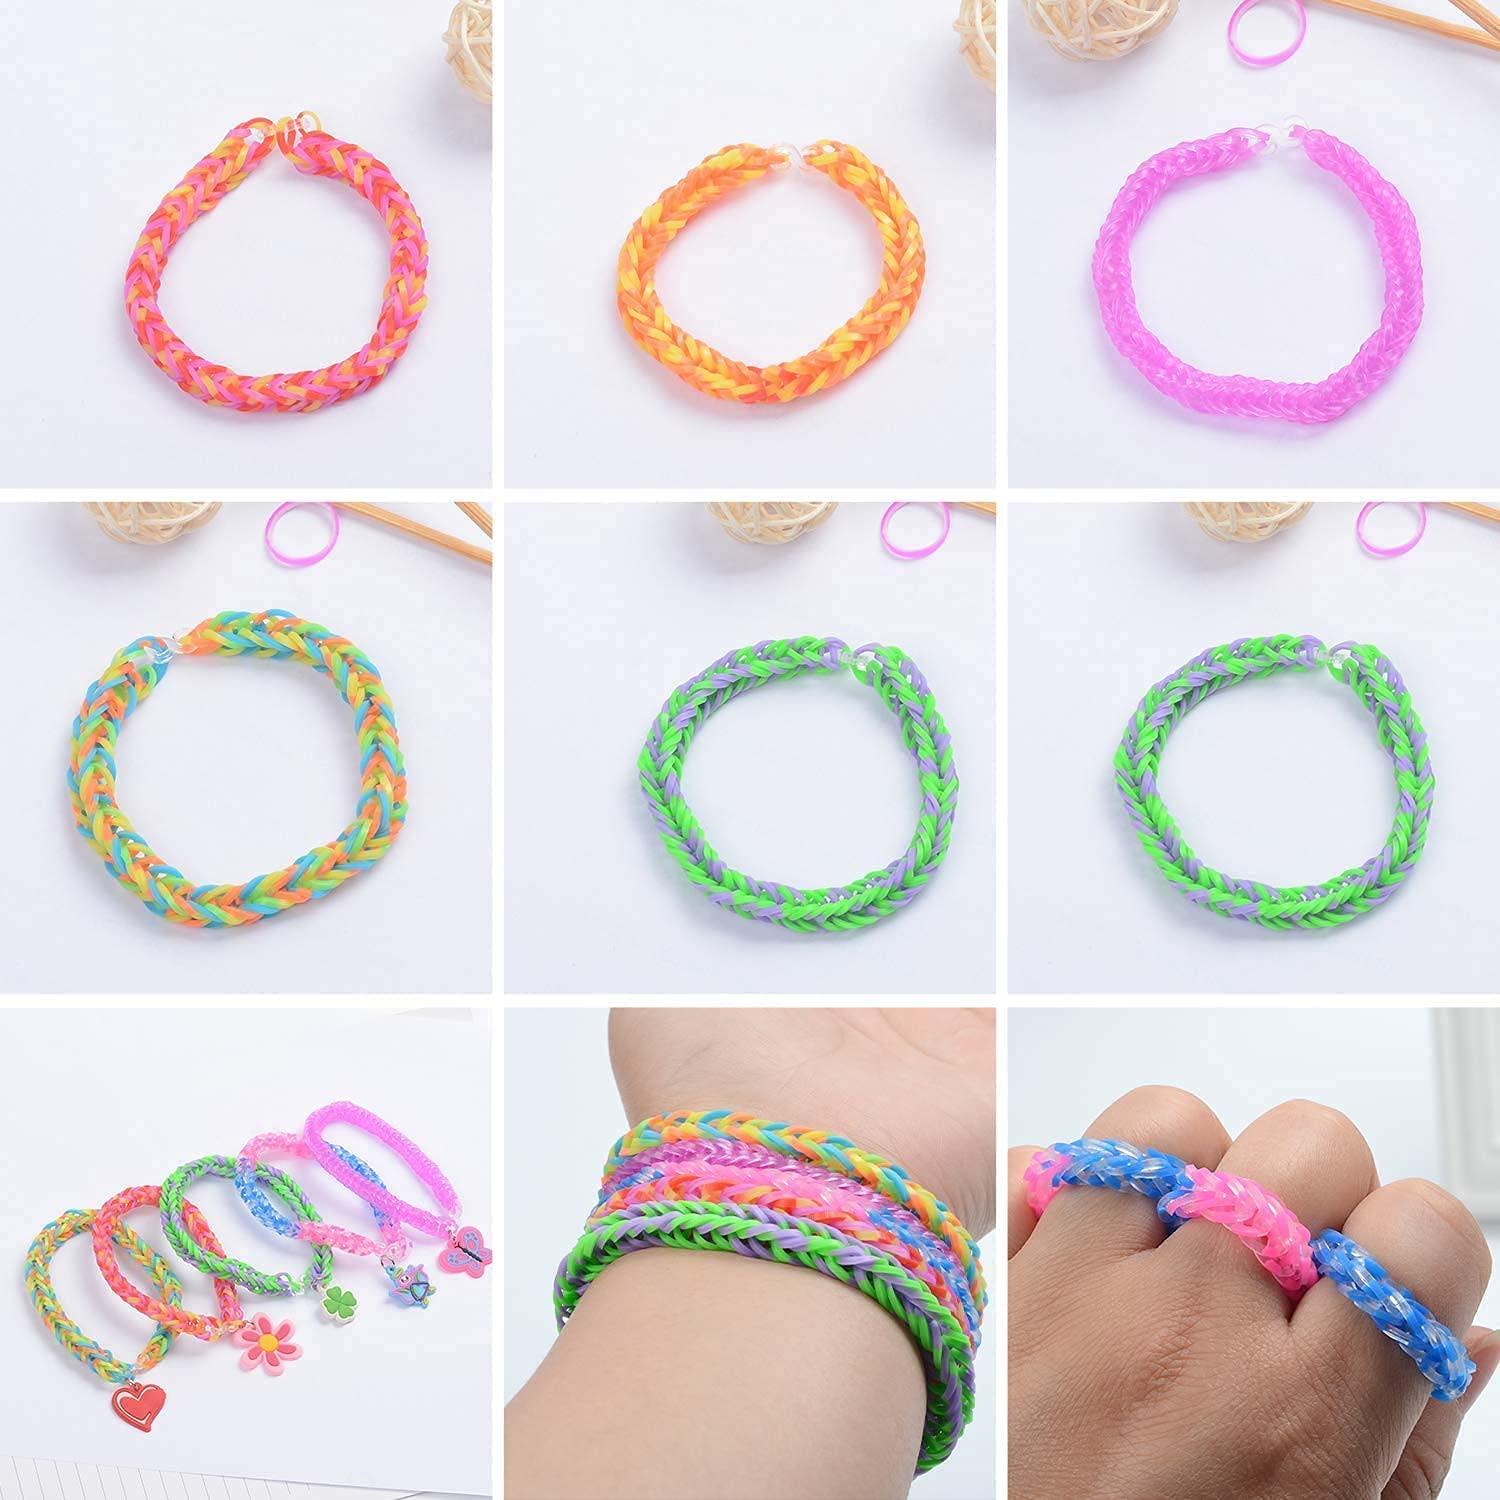 Rubber Band Bracelets: 35 colorful projects you'll love to make : Hopping,  Lucy: Amazon.in: Books